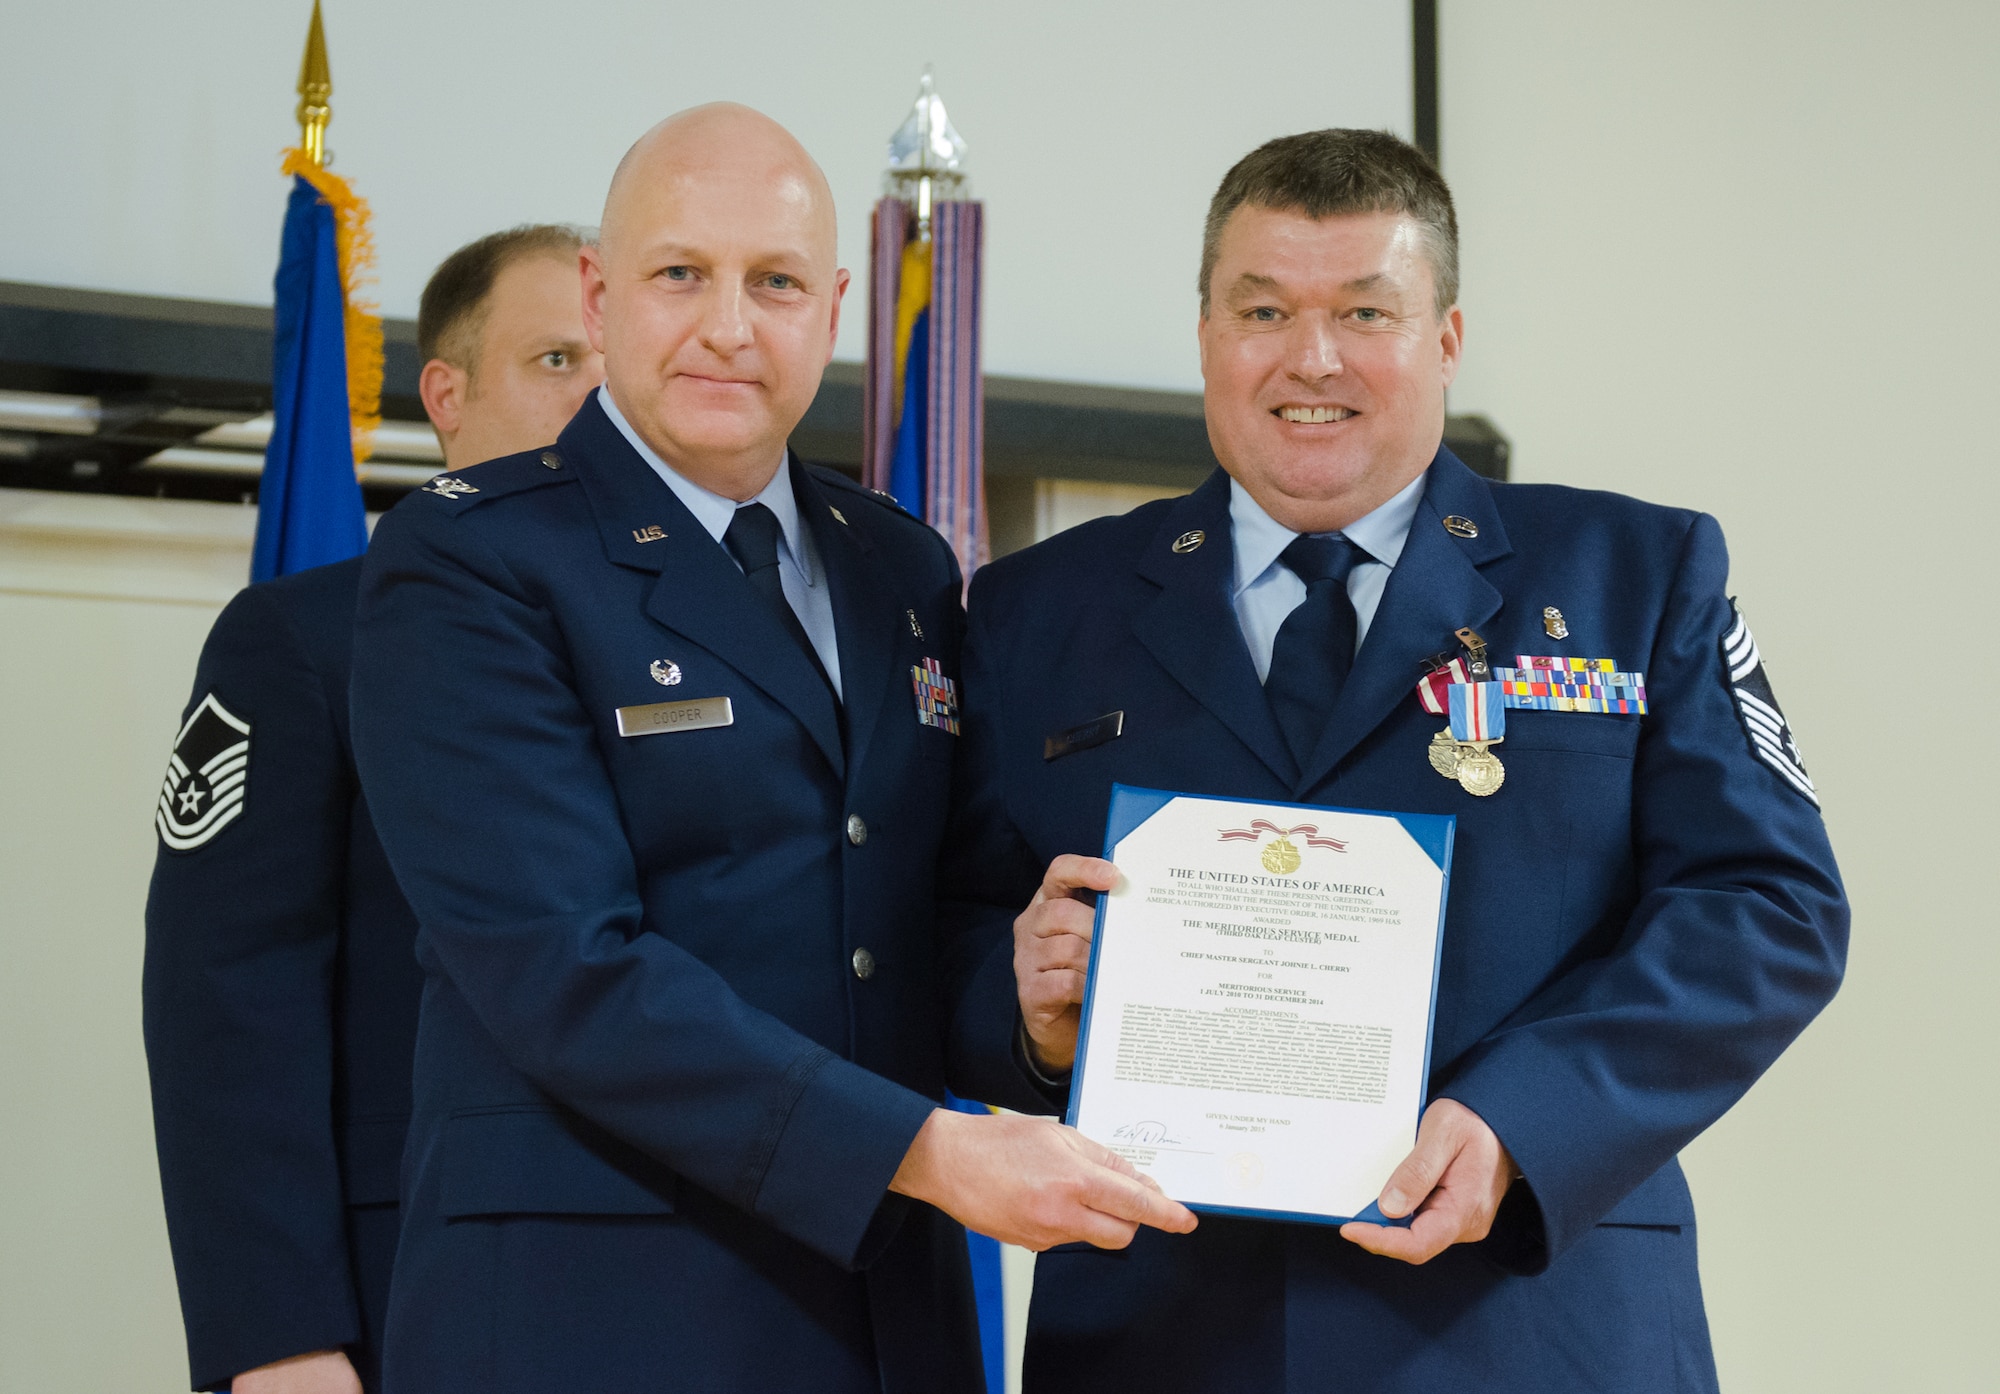 Col. Michael Cooper (left), commander of the 123rd Medical Group, presents Chief Master Sgt. Johnie Cherry with a Meritorious Service Medal during Cherry's retirement ceremony at the Kentucky Air National Guard Base in Louisville, Ky., Feb. 7, 2015. Cherry retired after more than 34 years of service to the active-duty Air Force and Air National Guard. (U.S. Air National Guard photo by 2nd. Lt. James Killen)